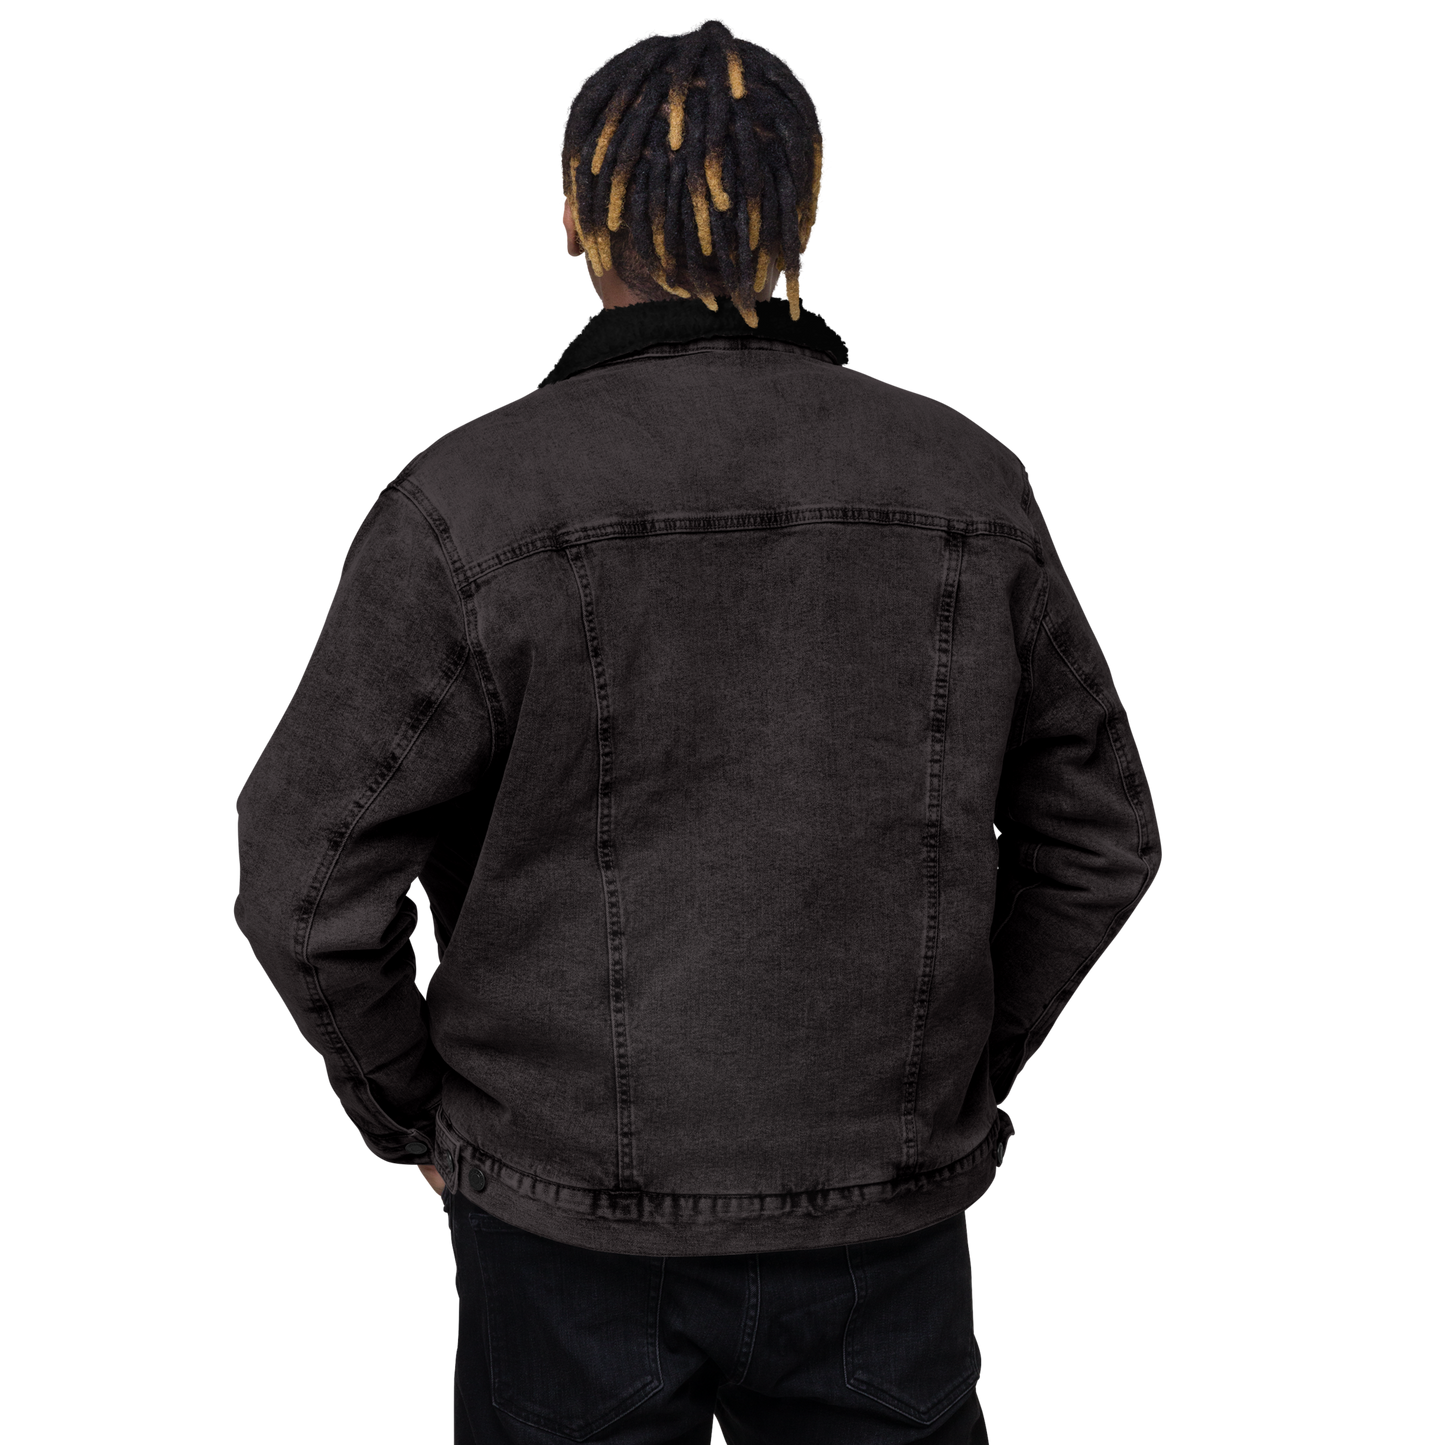 YHM Designs - YVR Vancouver Denim Sherpa Jacket - Crossed-X Design with Airport Code and Vintage Propliner - Black & White Embroidery - Image 09